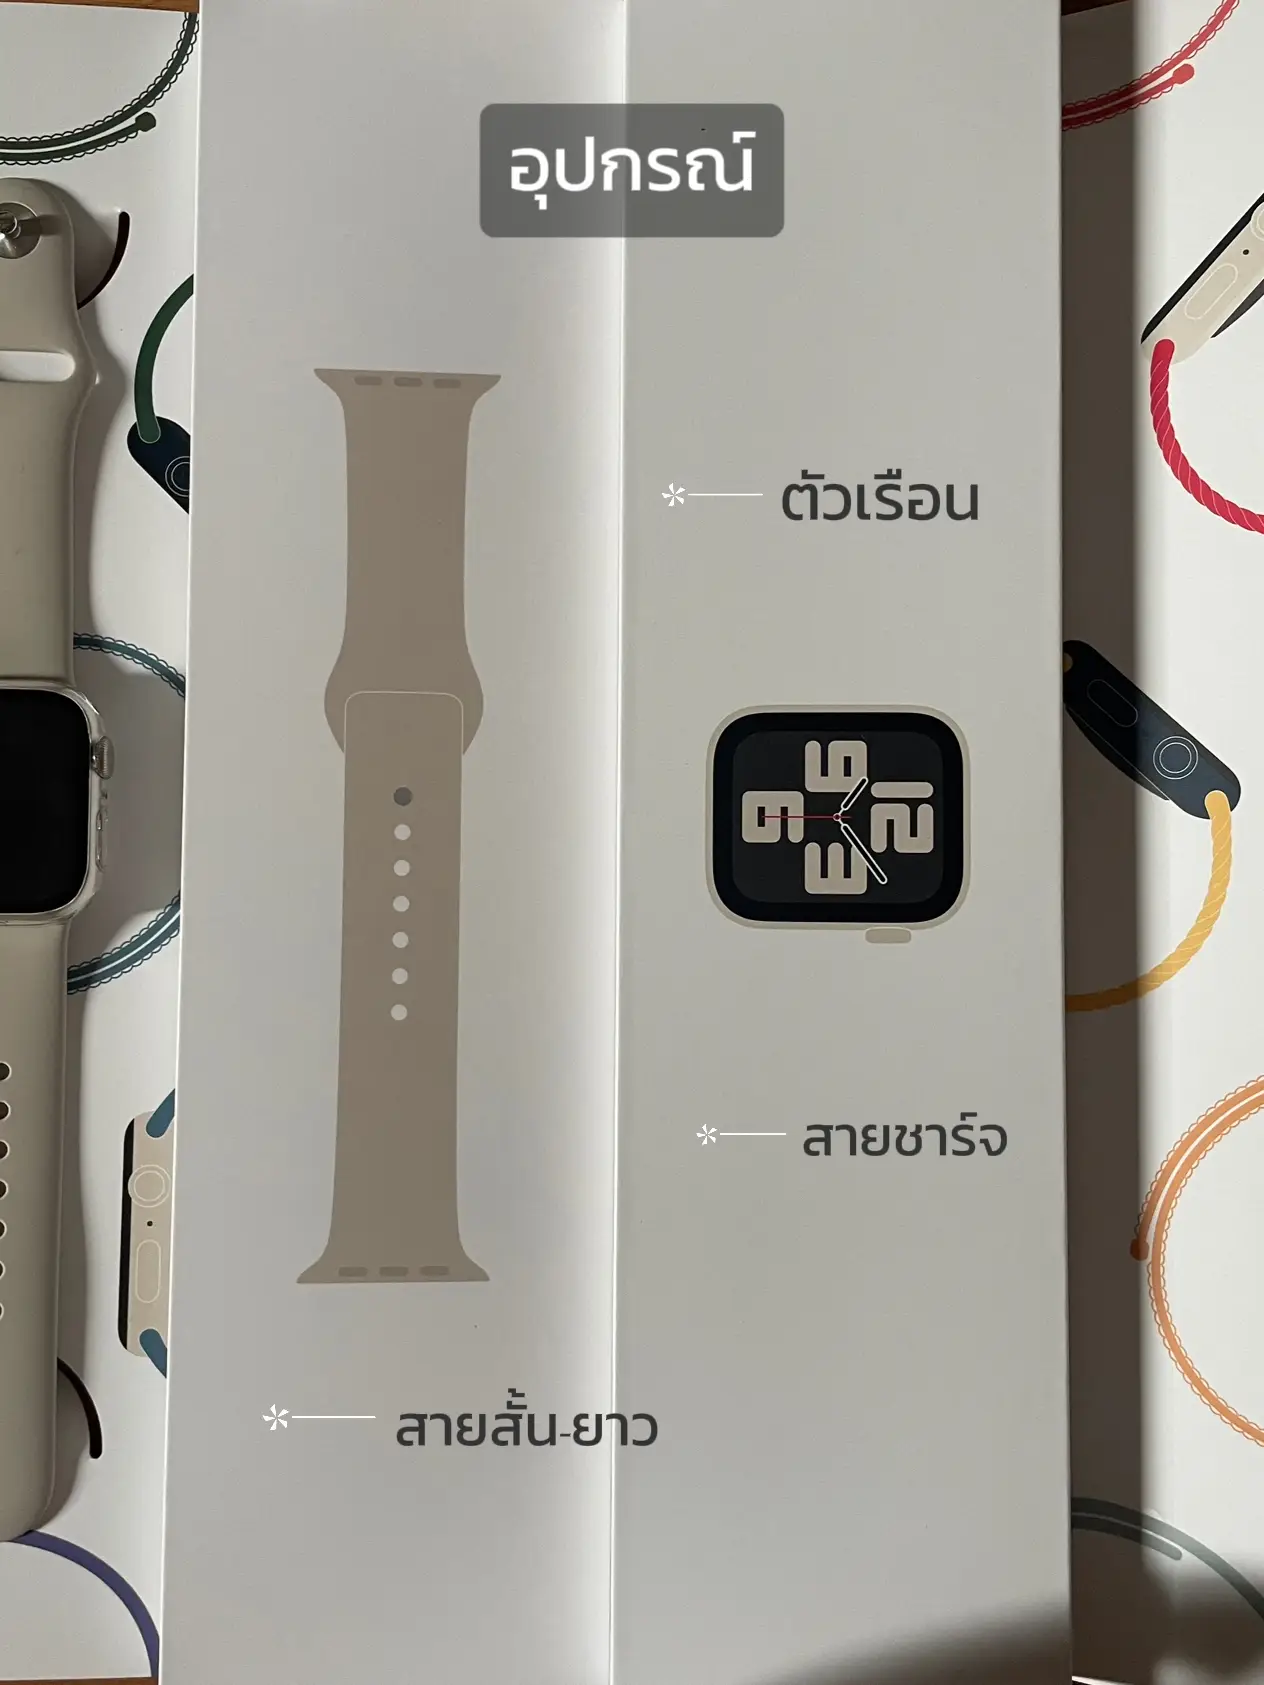 APPLE WATCH IS A NO GO, Gallery posted by LaurensLetters